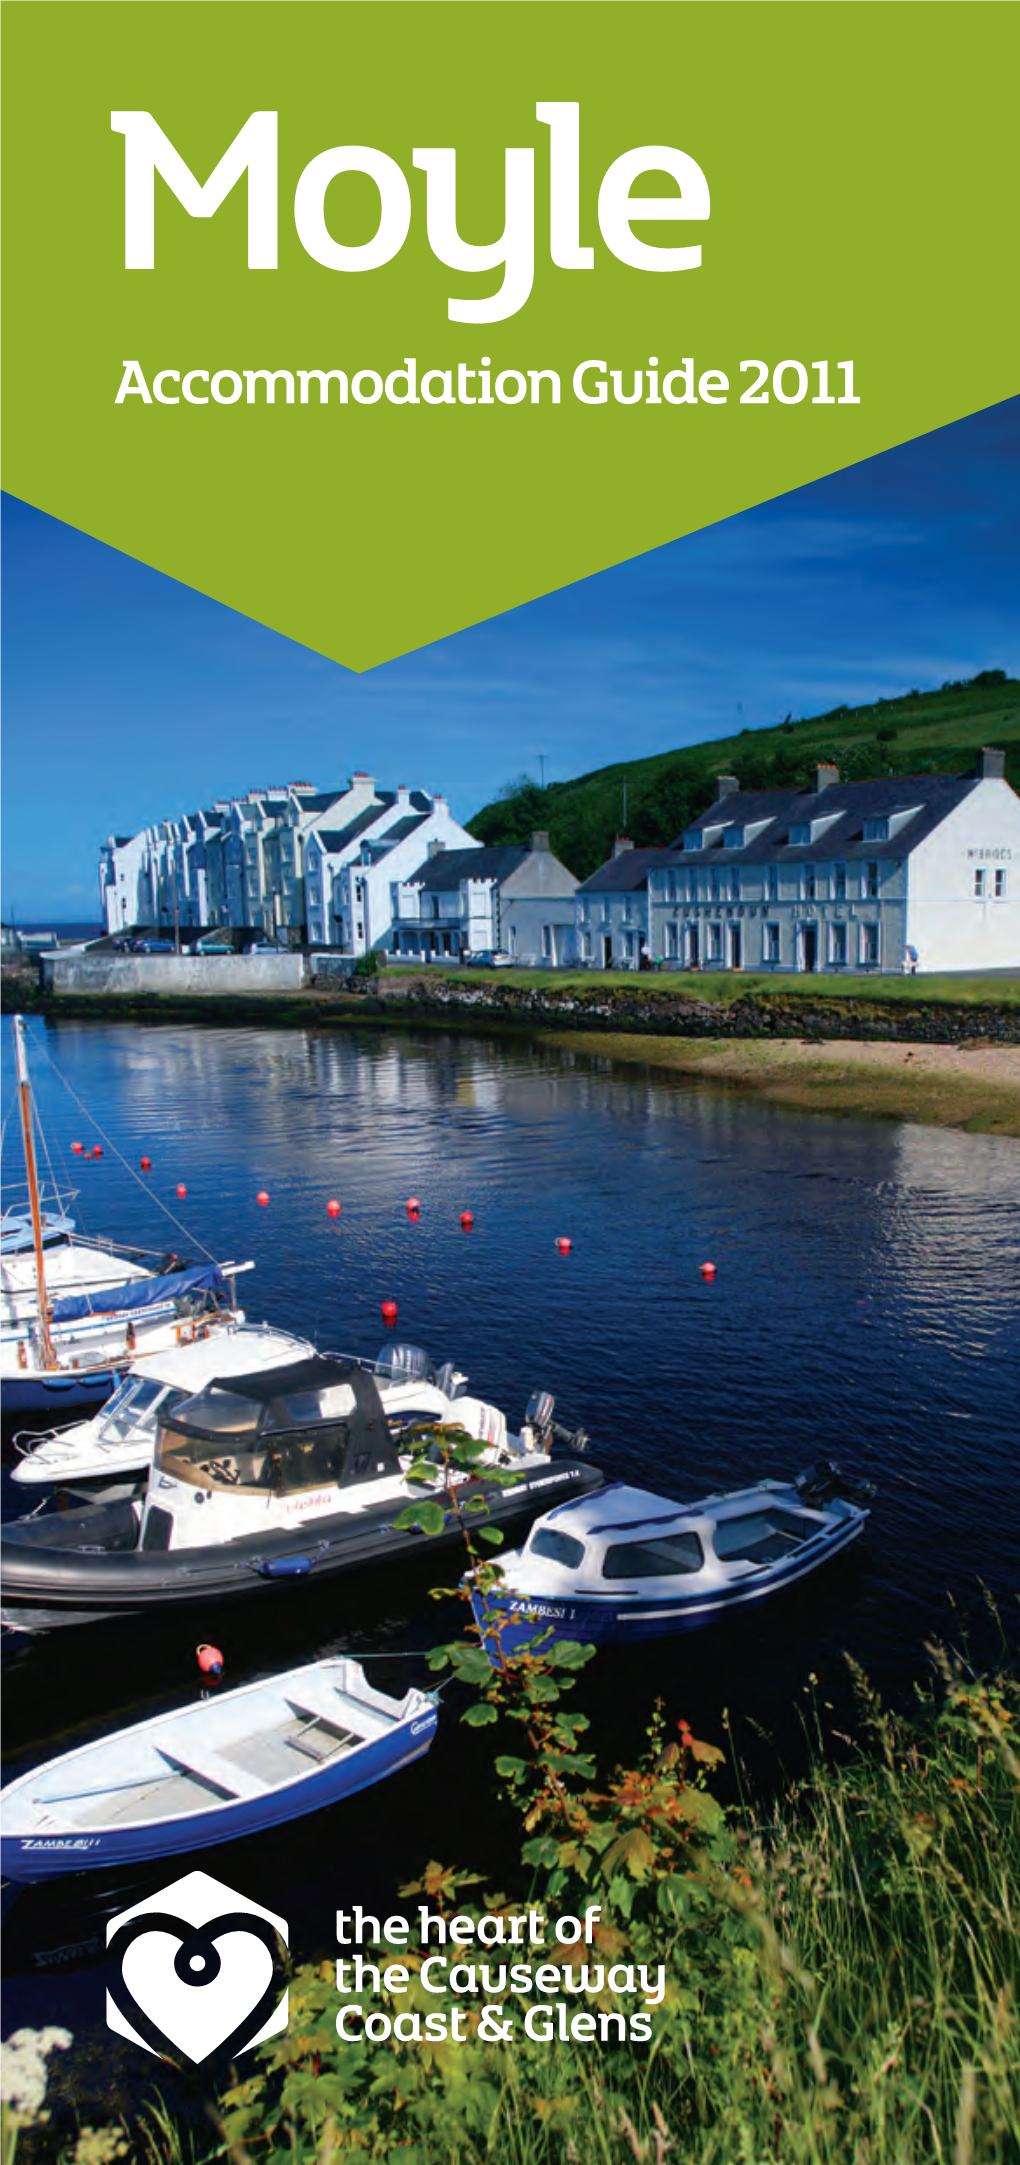 Accommodation Guide 2011 Welcome to the Moyle Accommodation Guide